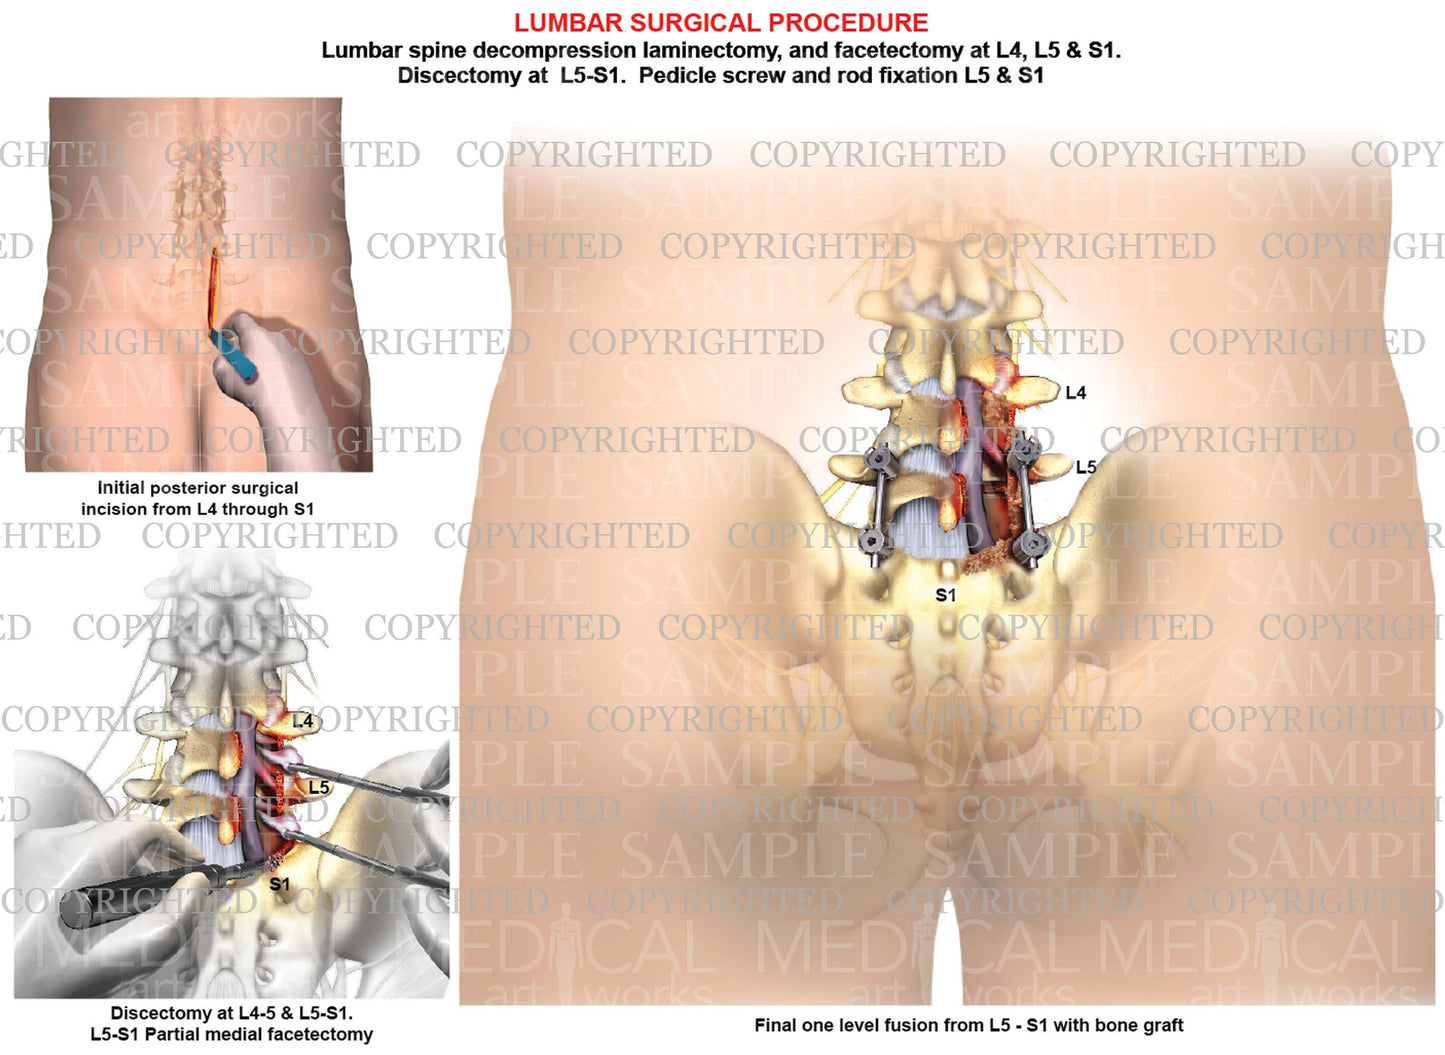 1 Level - L4-5 and L5-S1 Lumbar right sided discectomies